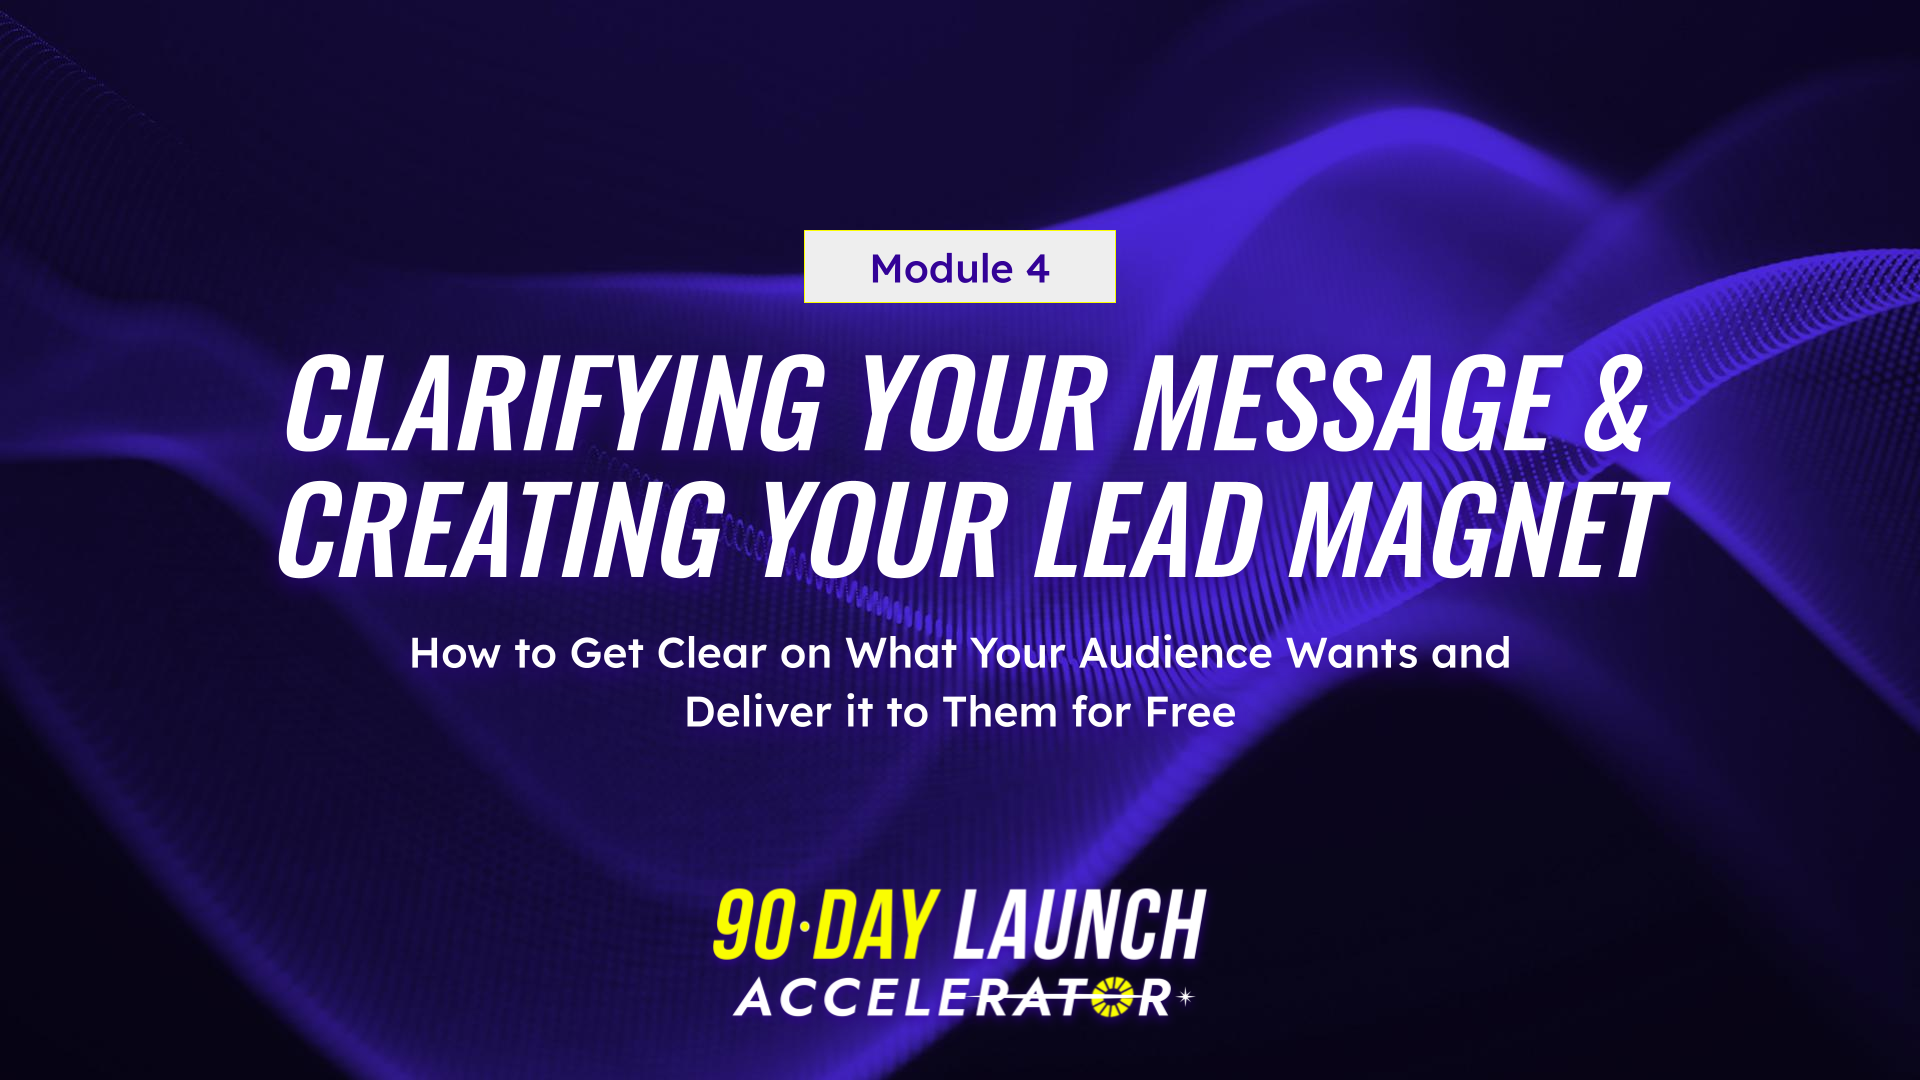 Clarifying Your Message & Creating Your Lead Magnet